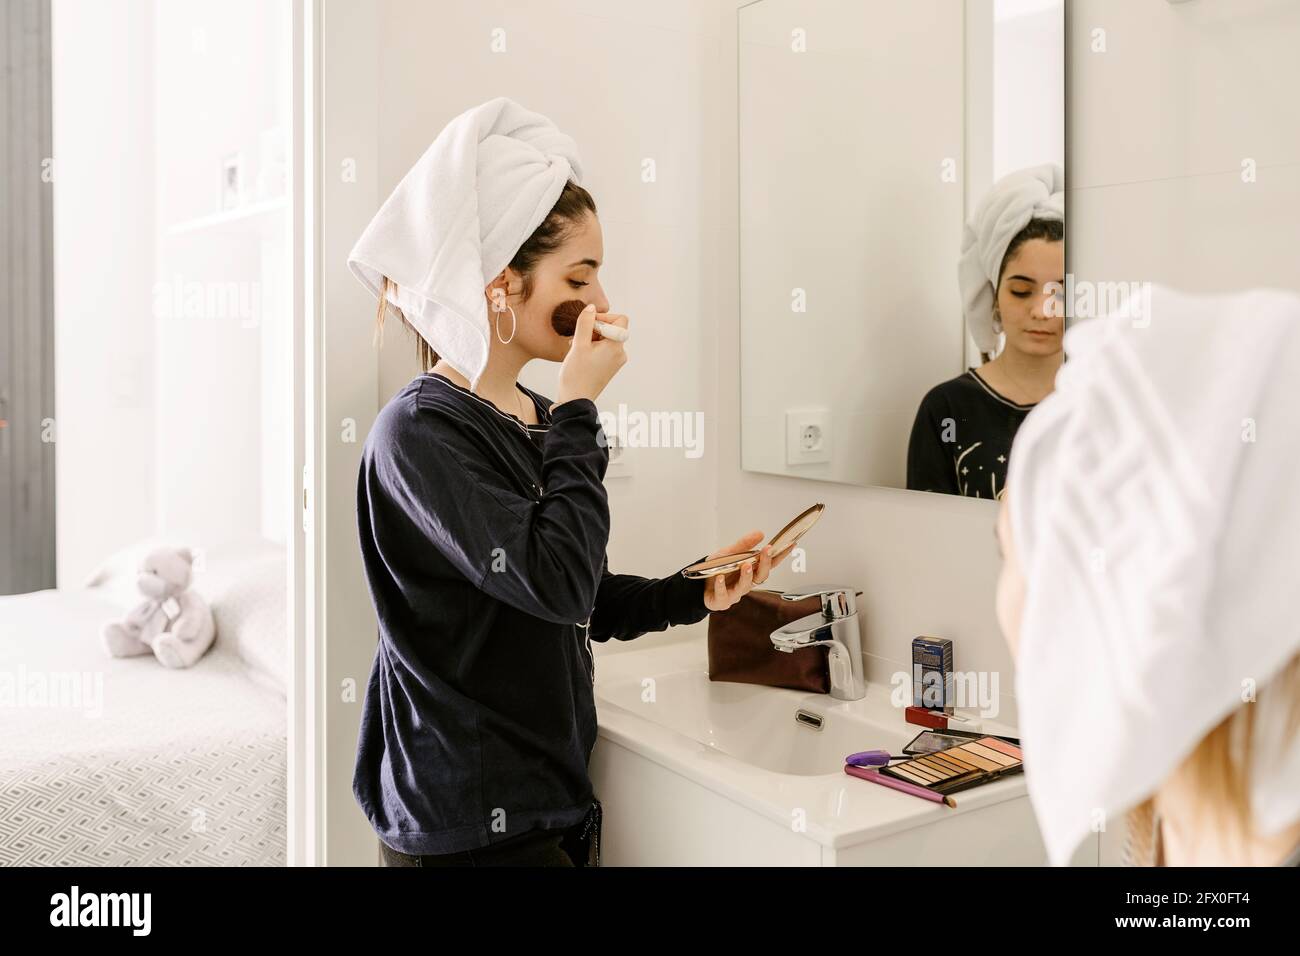 Side view of young Hispanic lady in casual clothes and towel on head applying foundation on face with brush while standing in front of mirror near unr Stock Photo